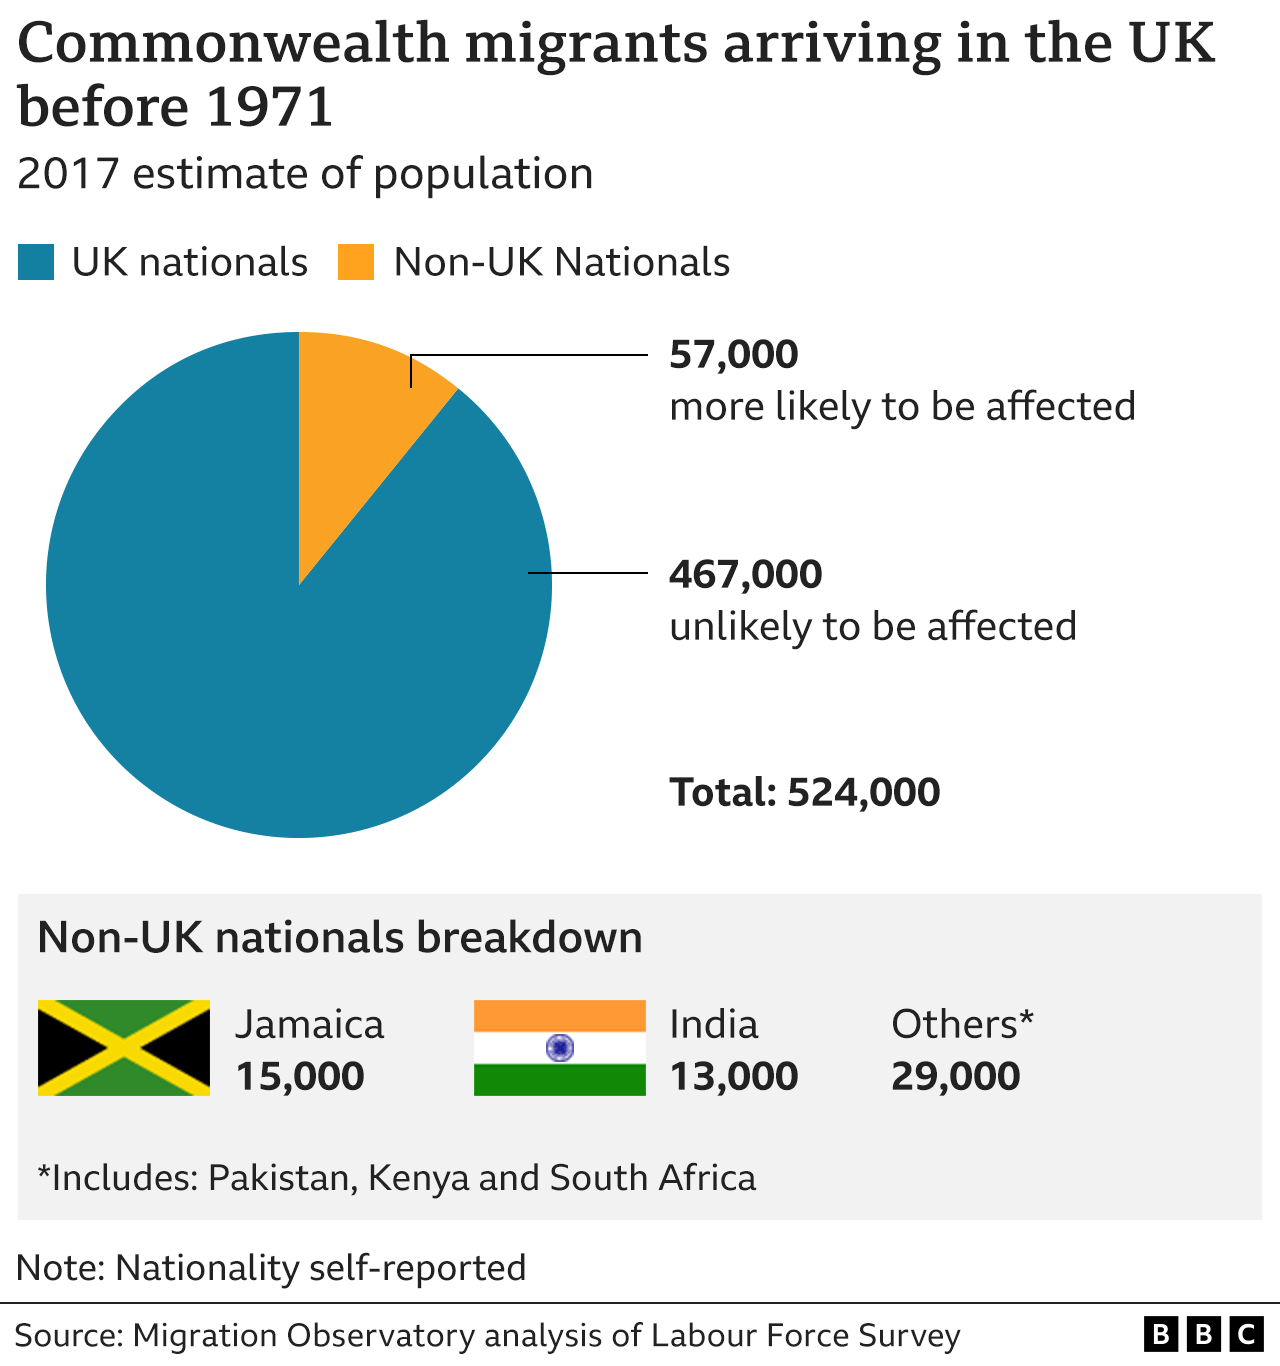 BBC graphic showing number of Commonwealth migrants who arrived in the UK before 1971